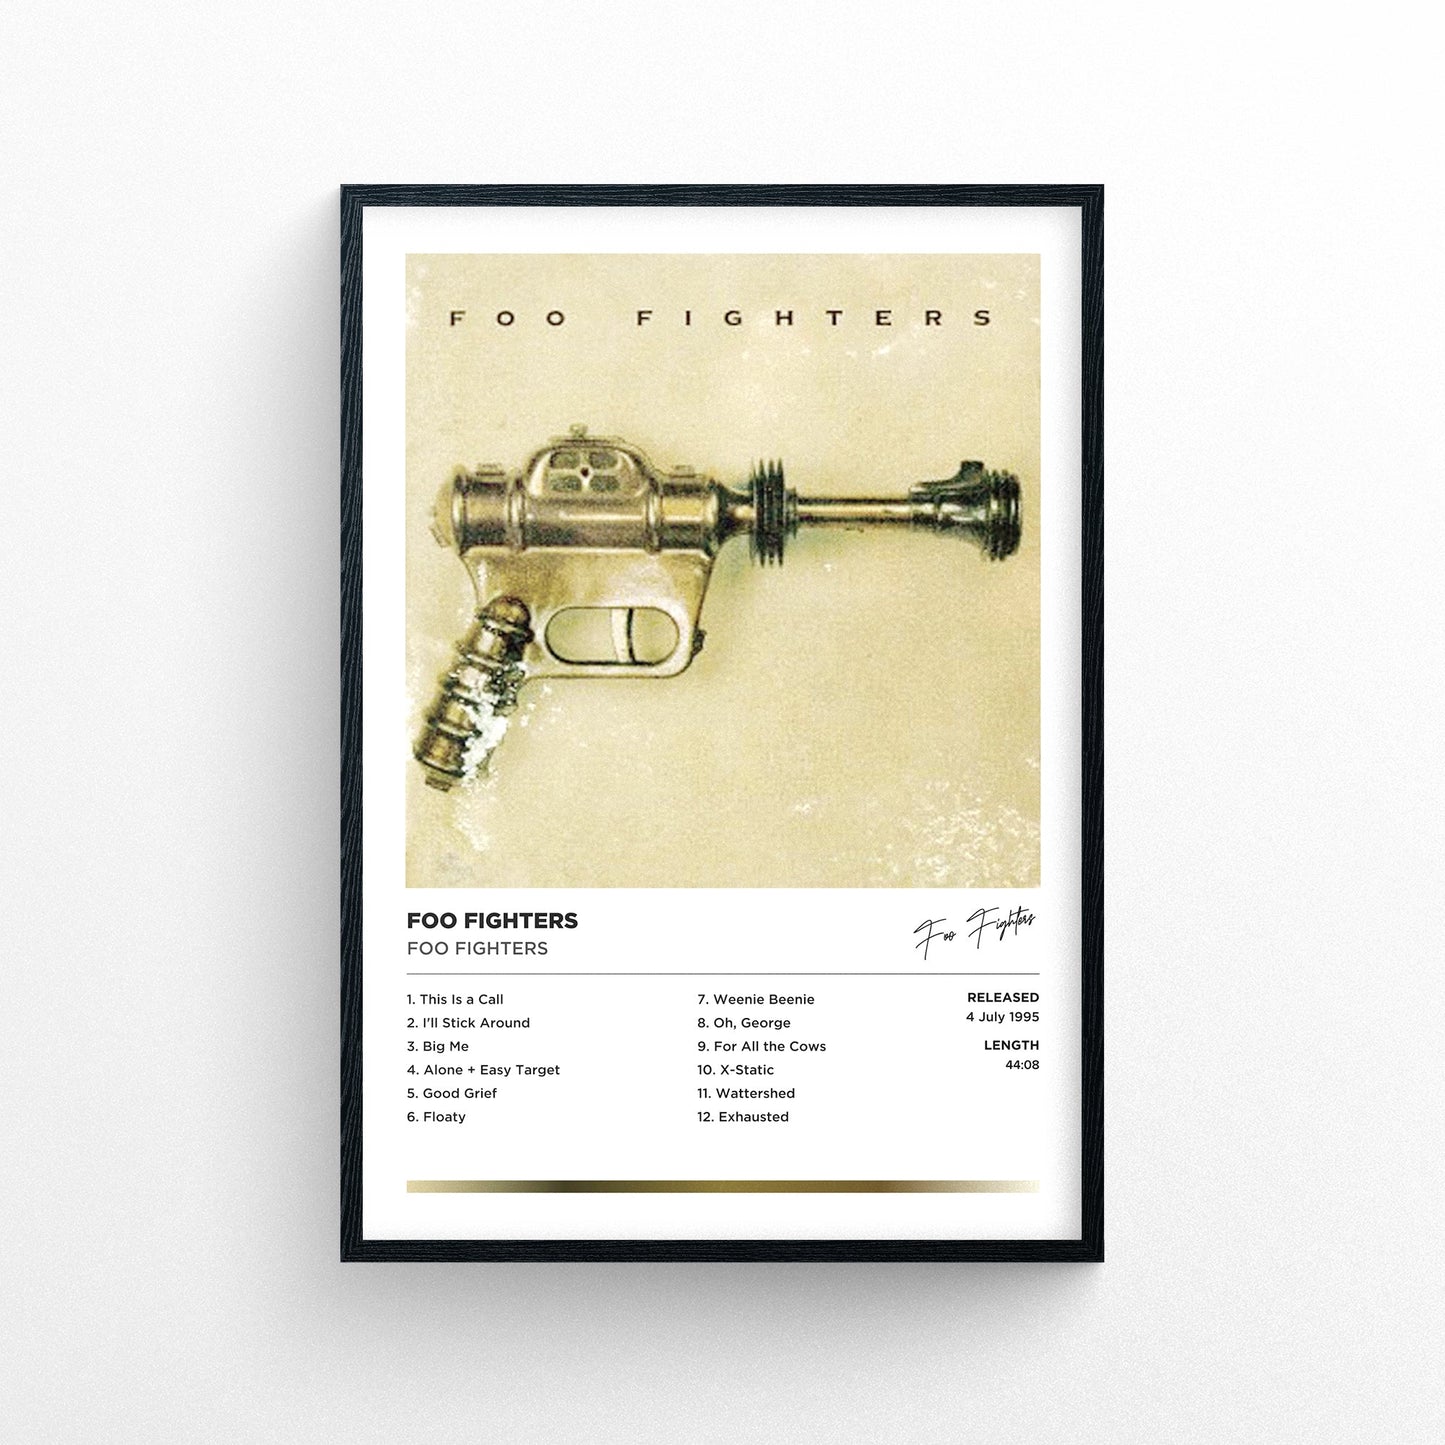 Foo Fighters - Foo Fighters Framed Poster Print | Polaroid Style | Album Cover Artwork